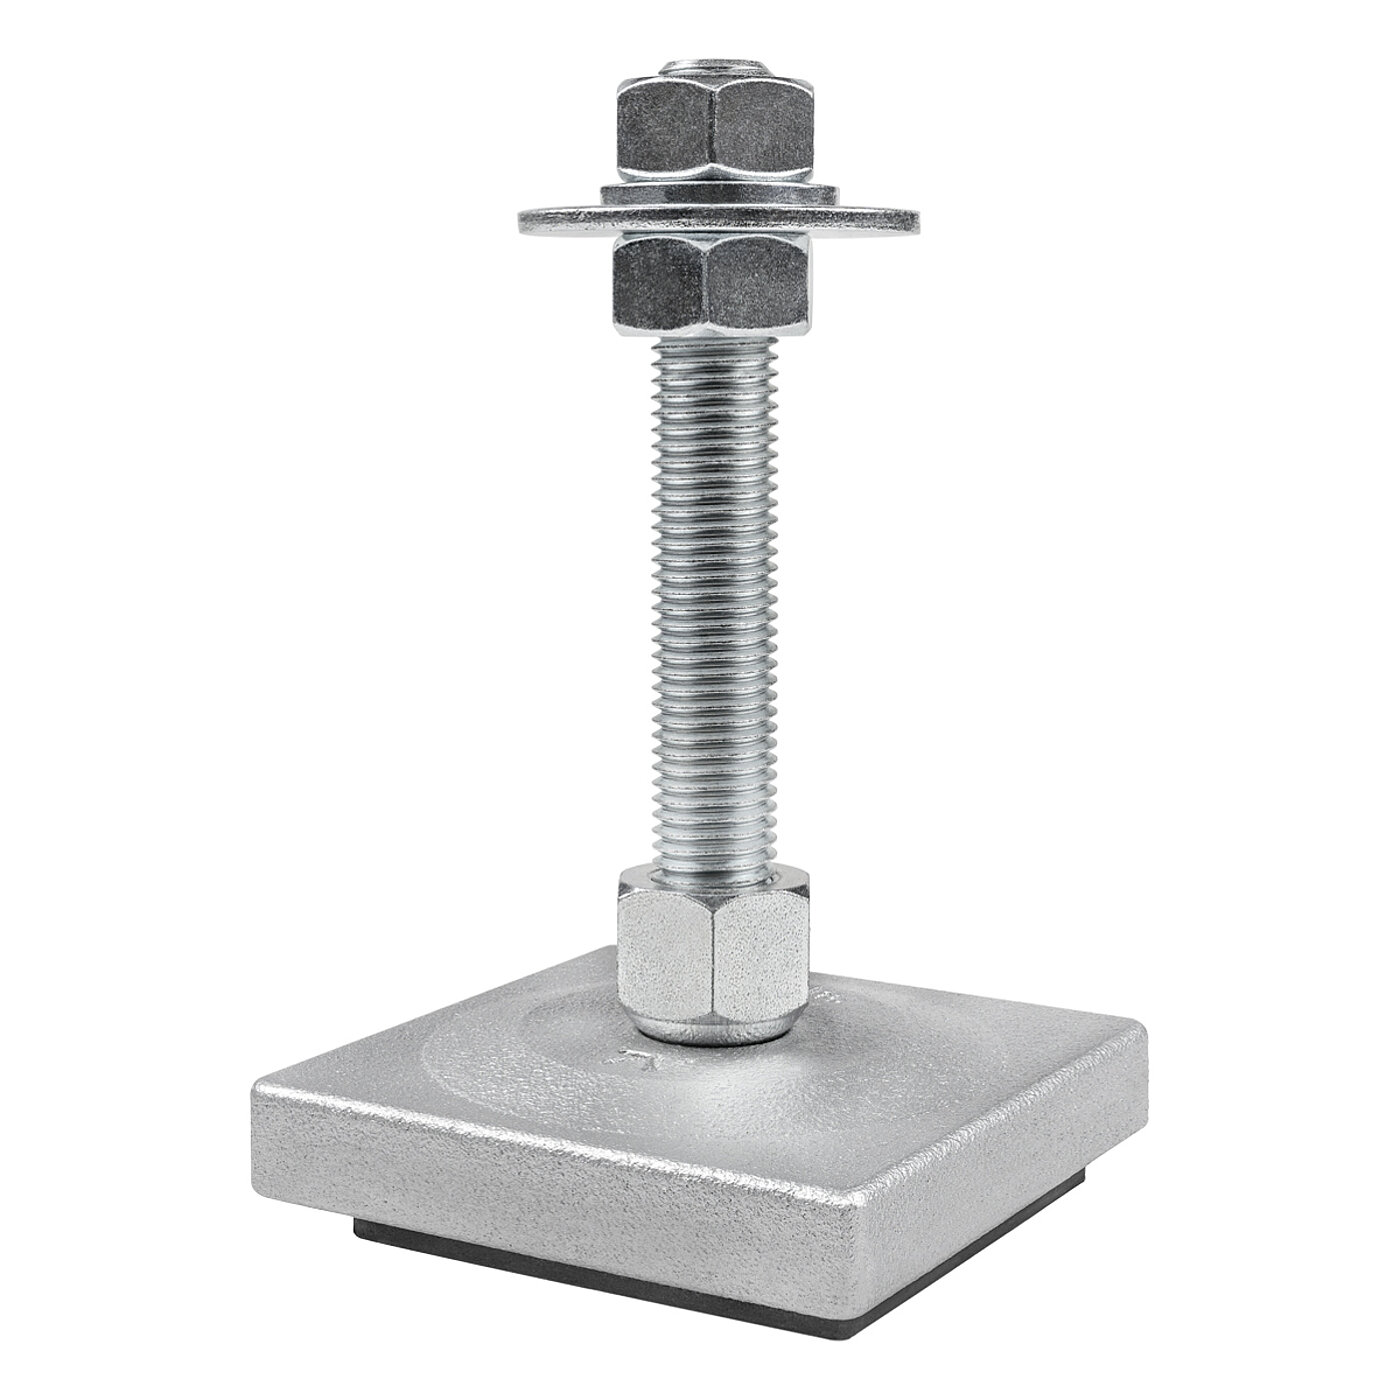 a square, silver-lacquered levelling element made of cast iron, with a pendulum-action zinc-coated levelling screw placed in a hexagonal cap nut on top of the cast iron corpus, with the corpus and cap nut tightly connected to each other against falling apart, and black elastomer for vibration damping at the bottom, isolated on white background